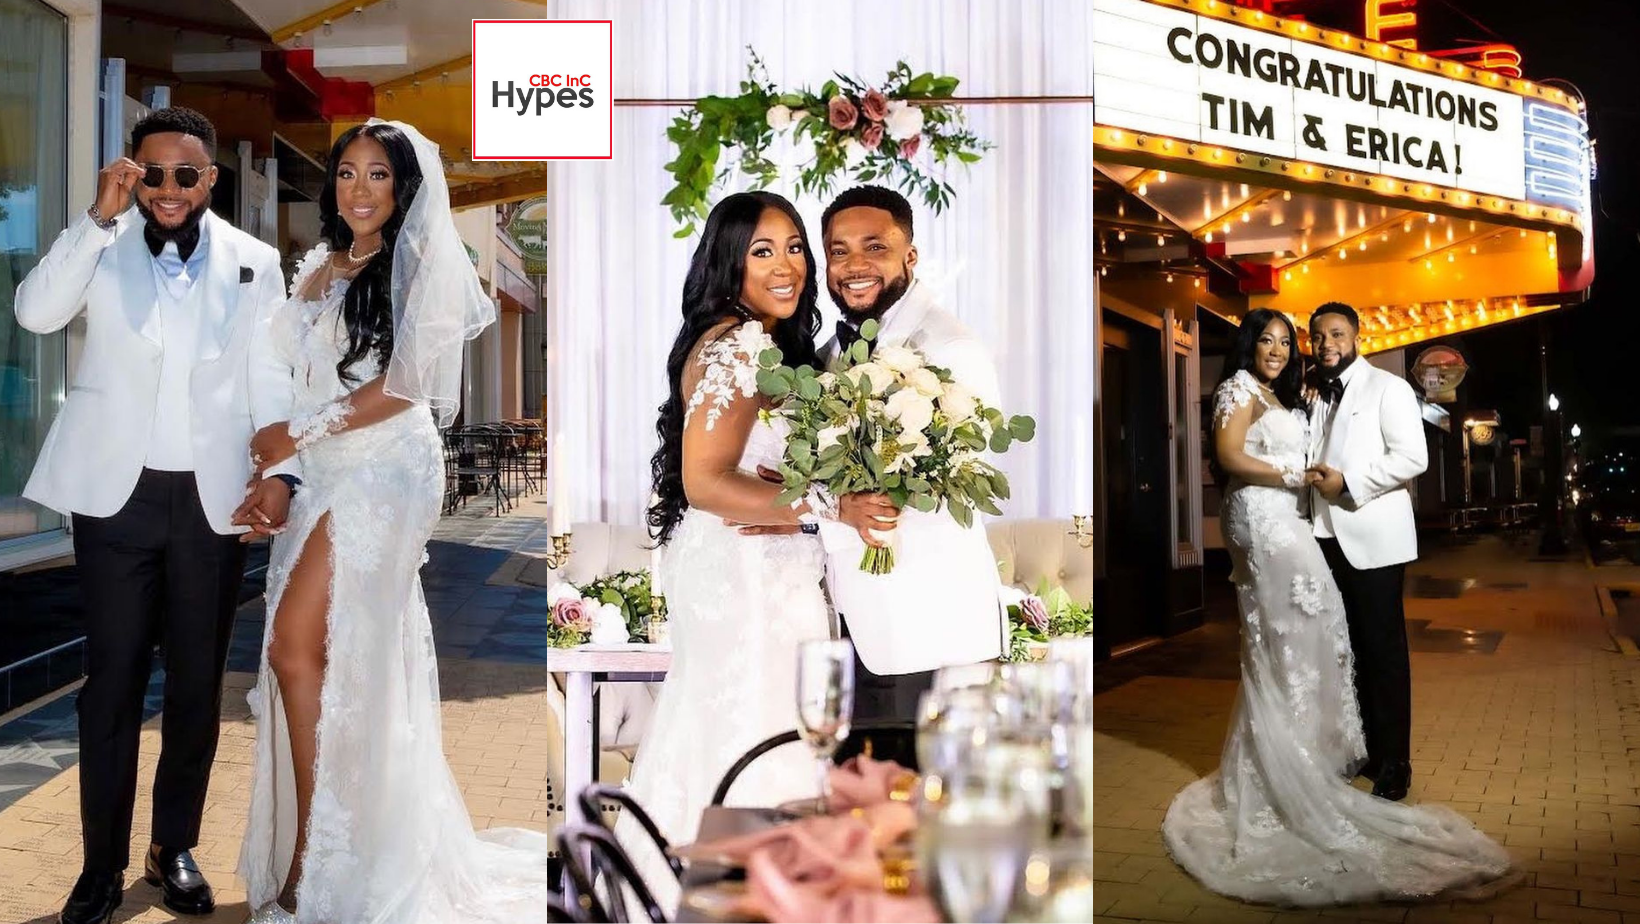 Tim Godfrey gets hitched 4